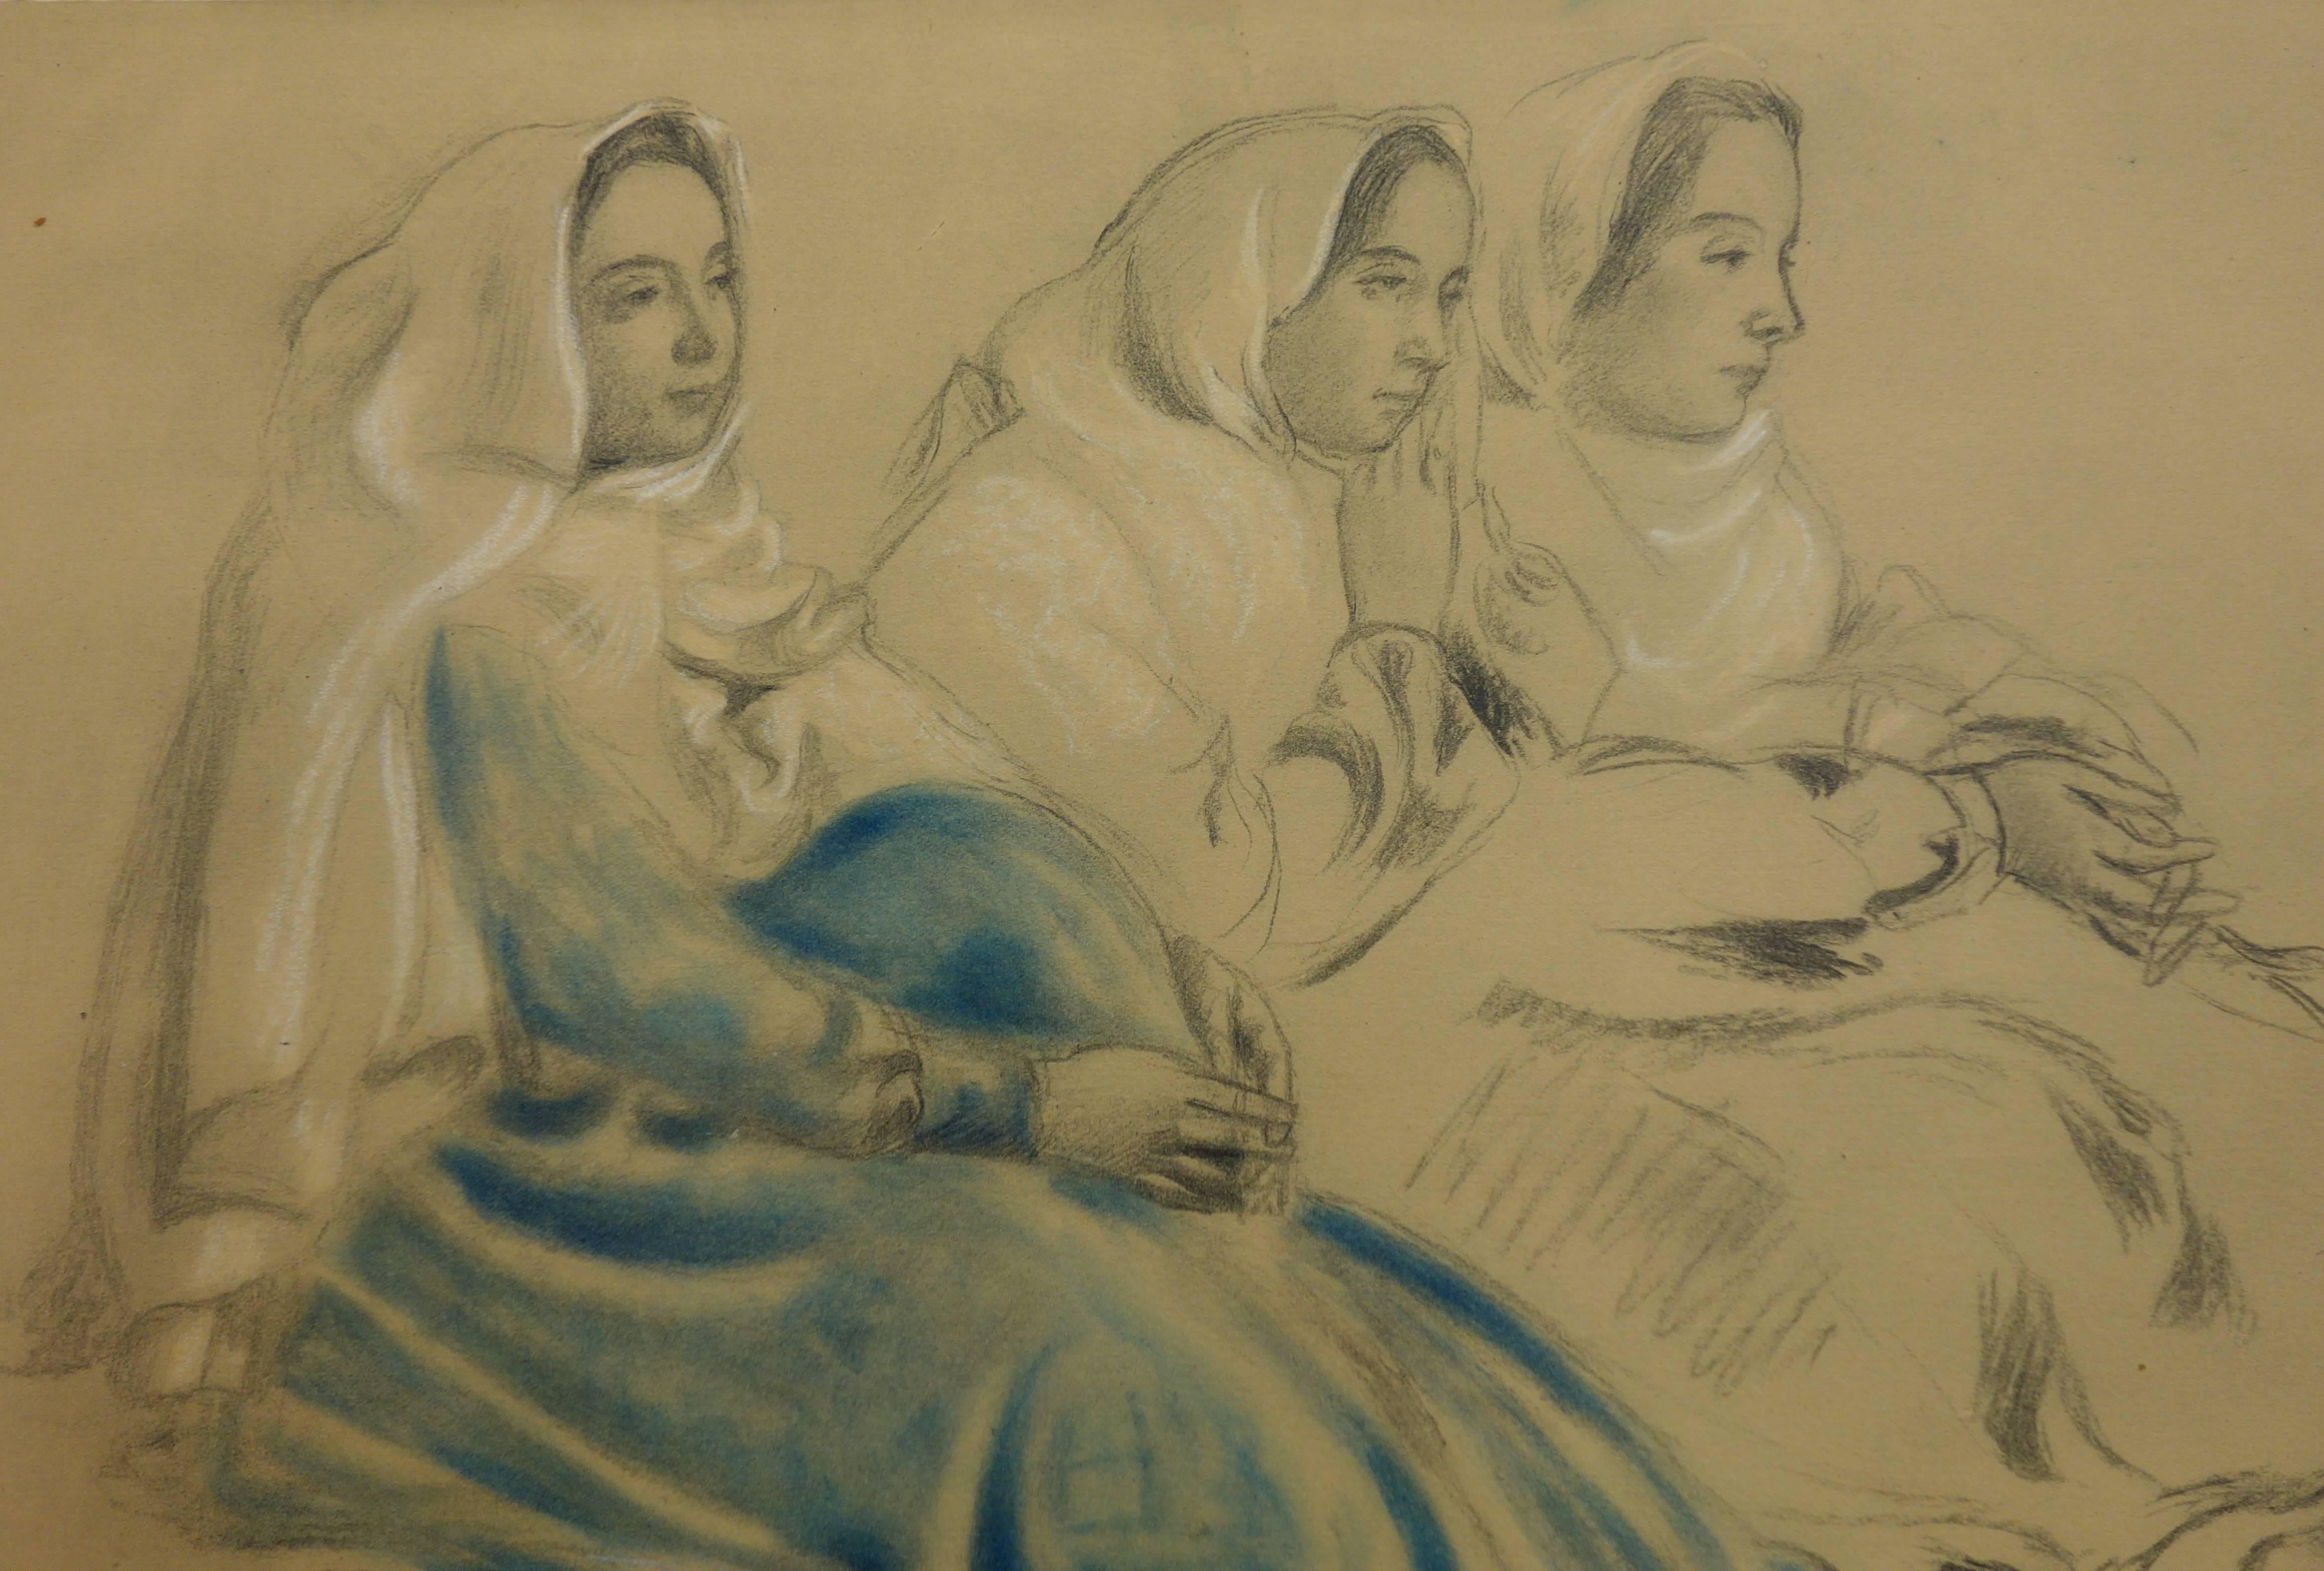 Three Resting Women - Original lithograph - Print by Maurice Denis